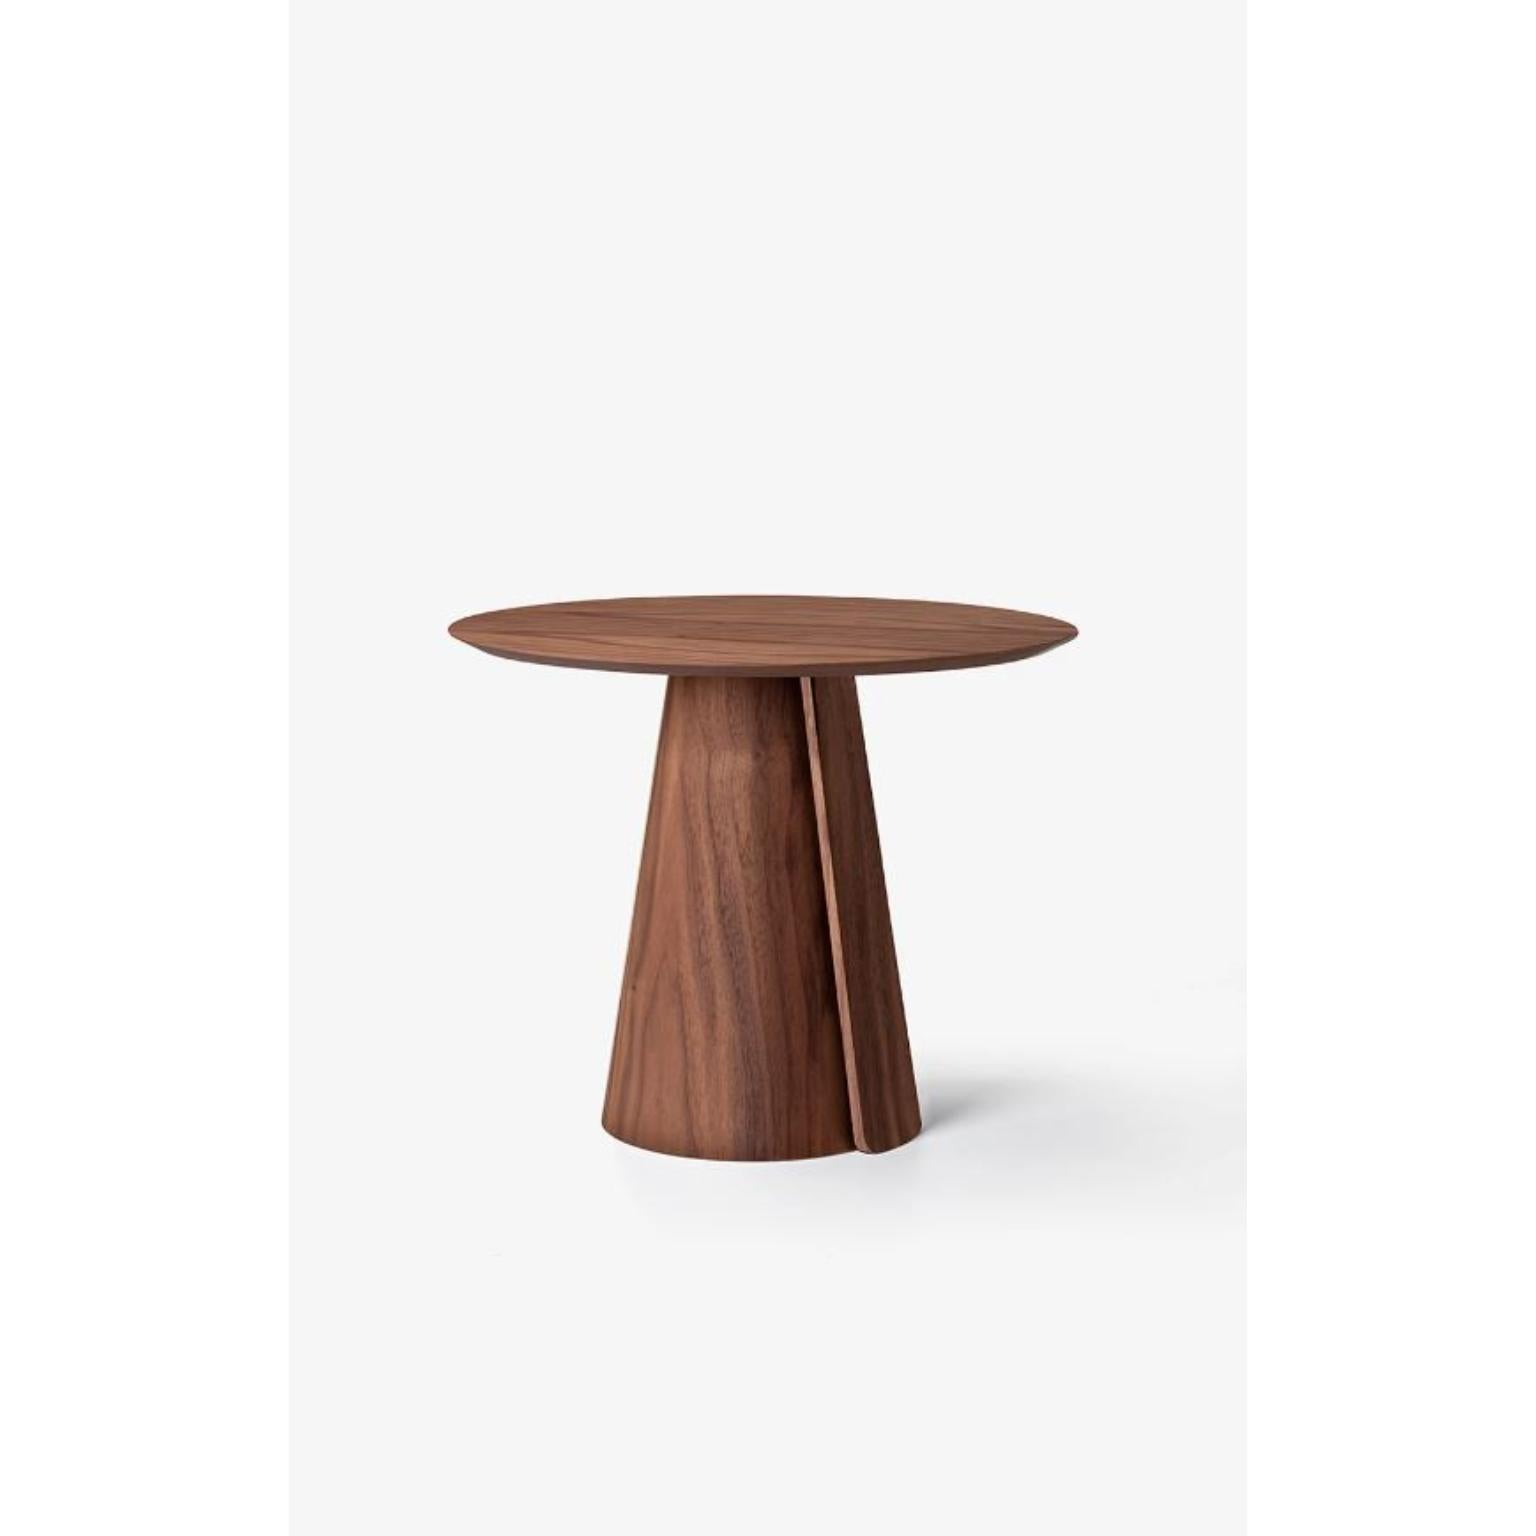 Volta Dining Table 90 by Wentz
Dimensions: D 90 x W 90 x H 75 cm
Materials: Wood, Plywood, MDF, Natural Wood Veneer, Steel.
Weight: 75kg / 165 lbs

The Volta table references nature in its impermanence. The detail on the base suggests natural